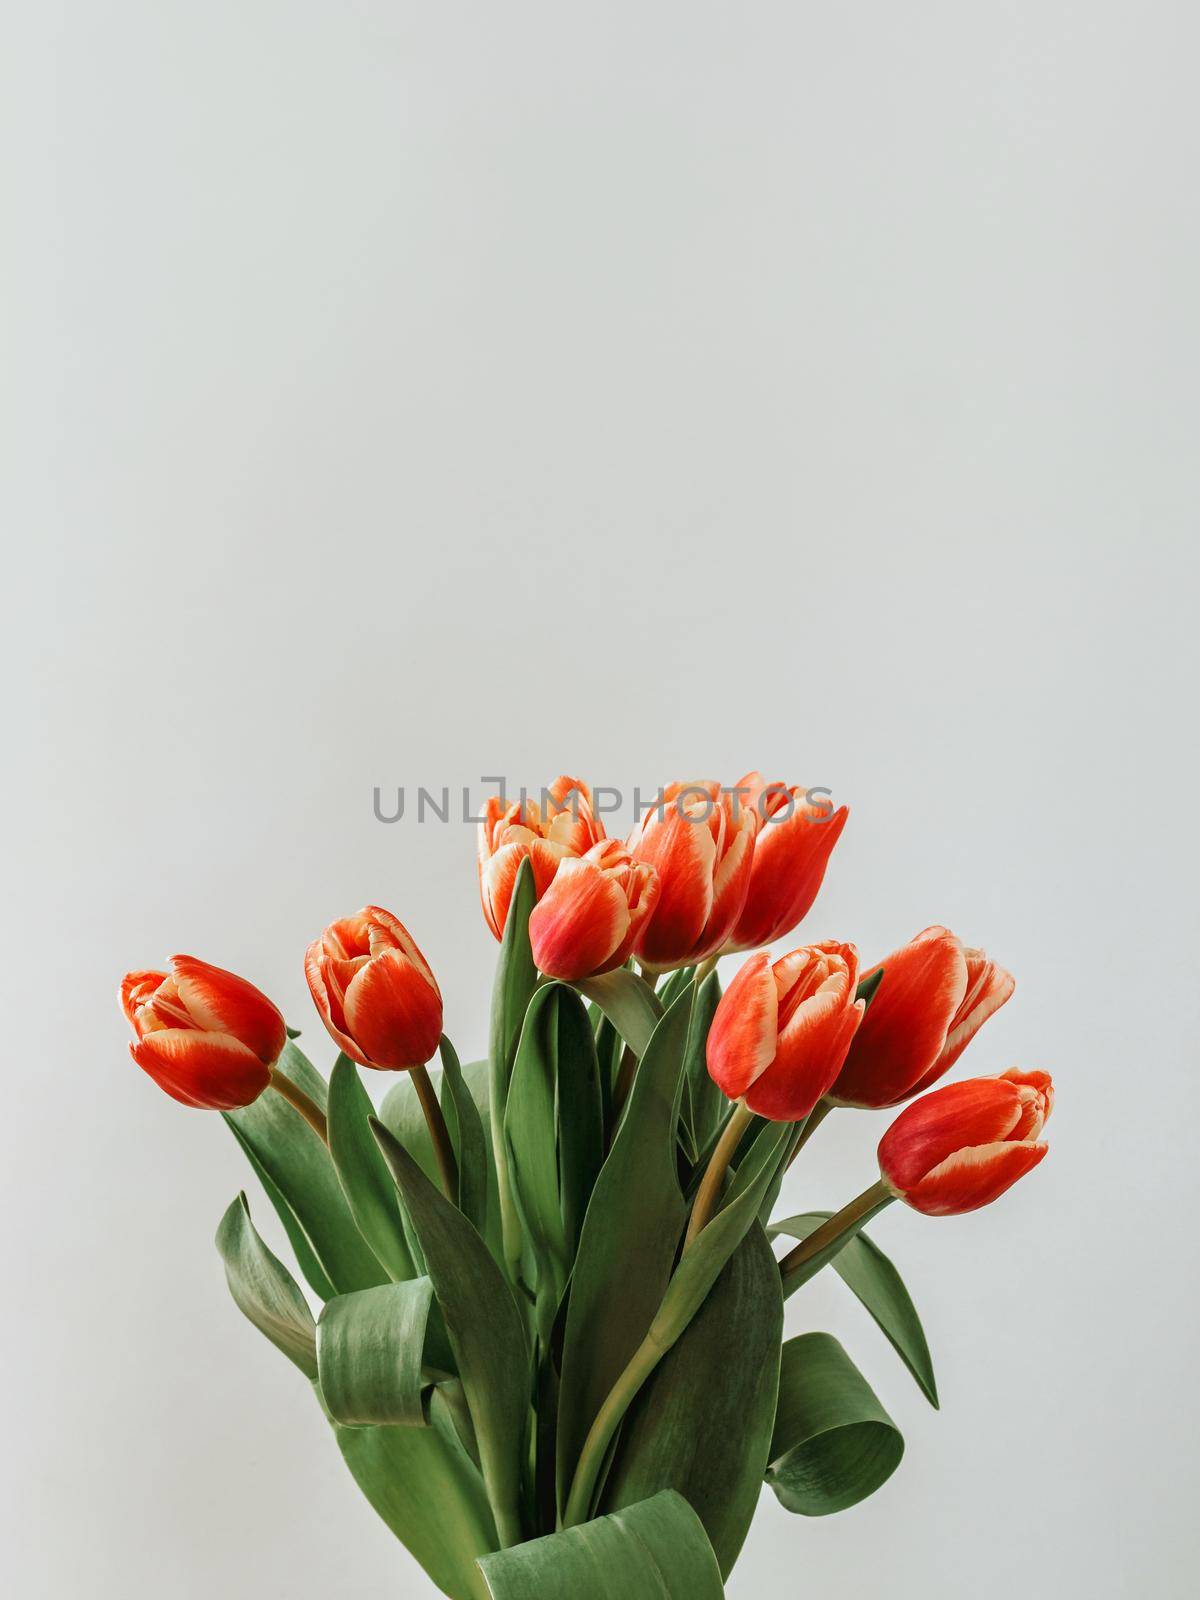 Aesthetic background with bunch of red tulips on light neutral background. Vertical image of perfect tulips with copy space for text. Spring flowers. Sell tulips. Spring mood. Top view or flat lay